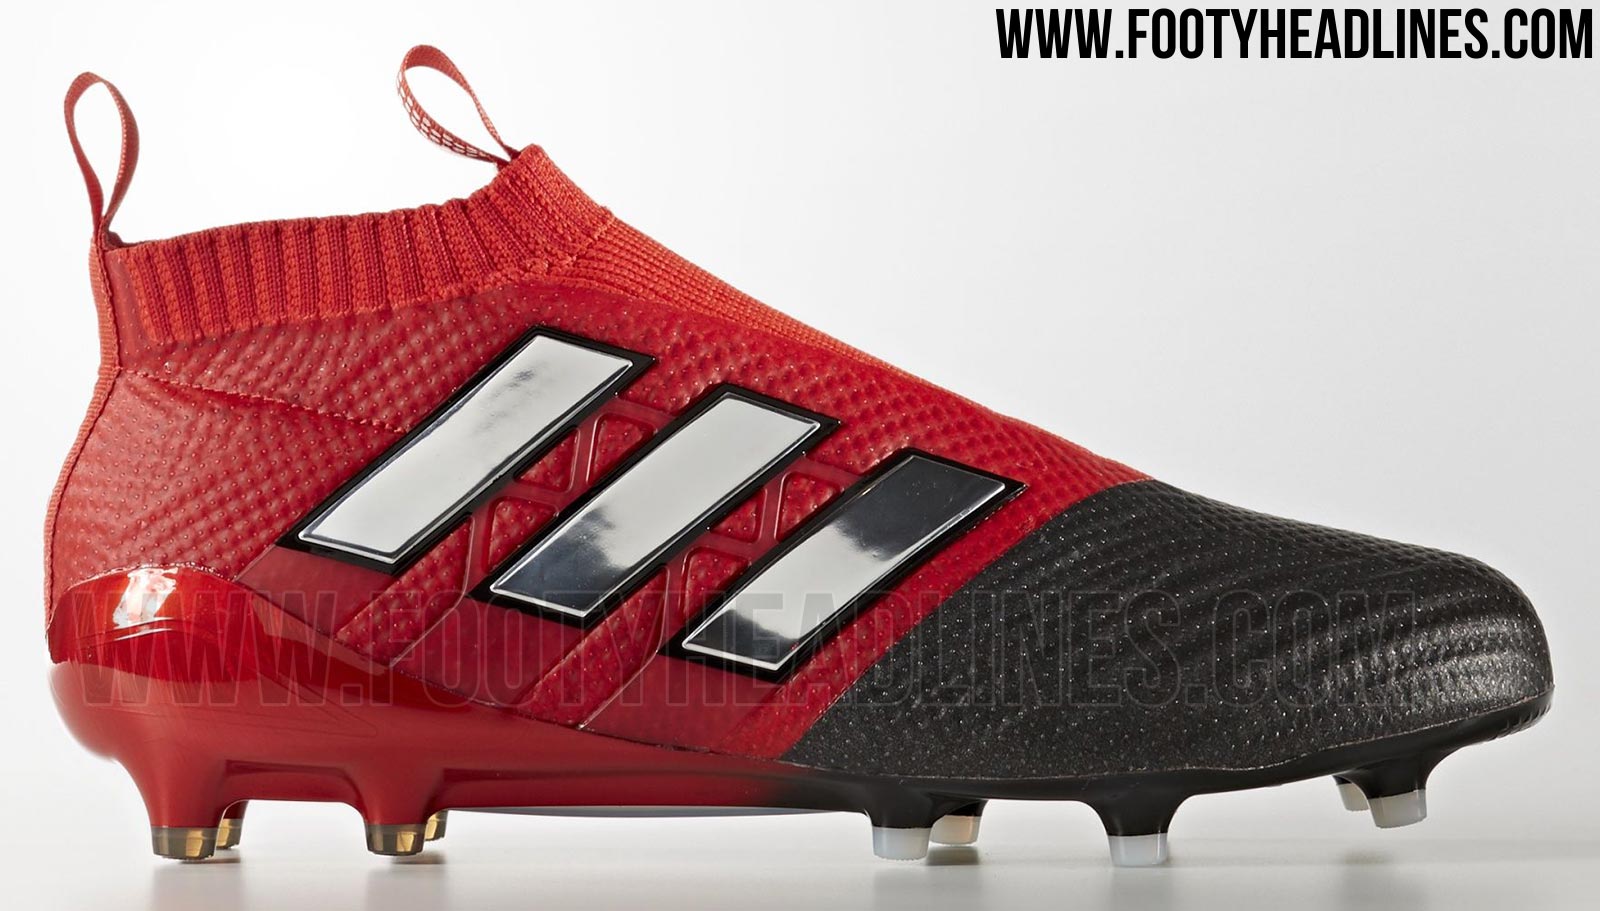 Full Adidas Red Limit Pack - Footy Headlines